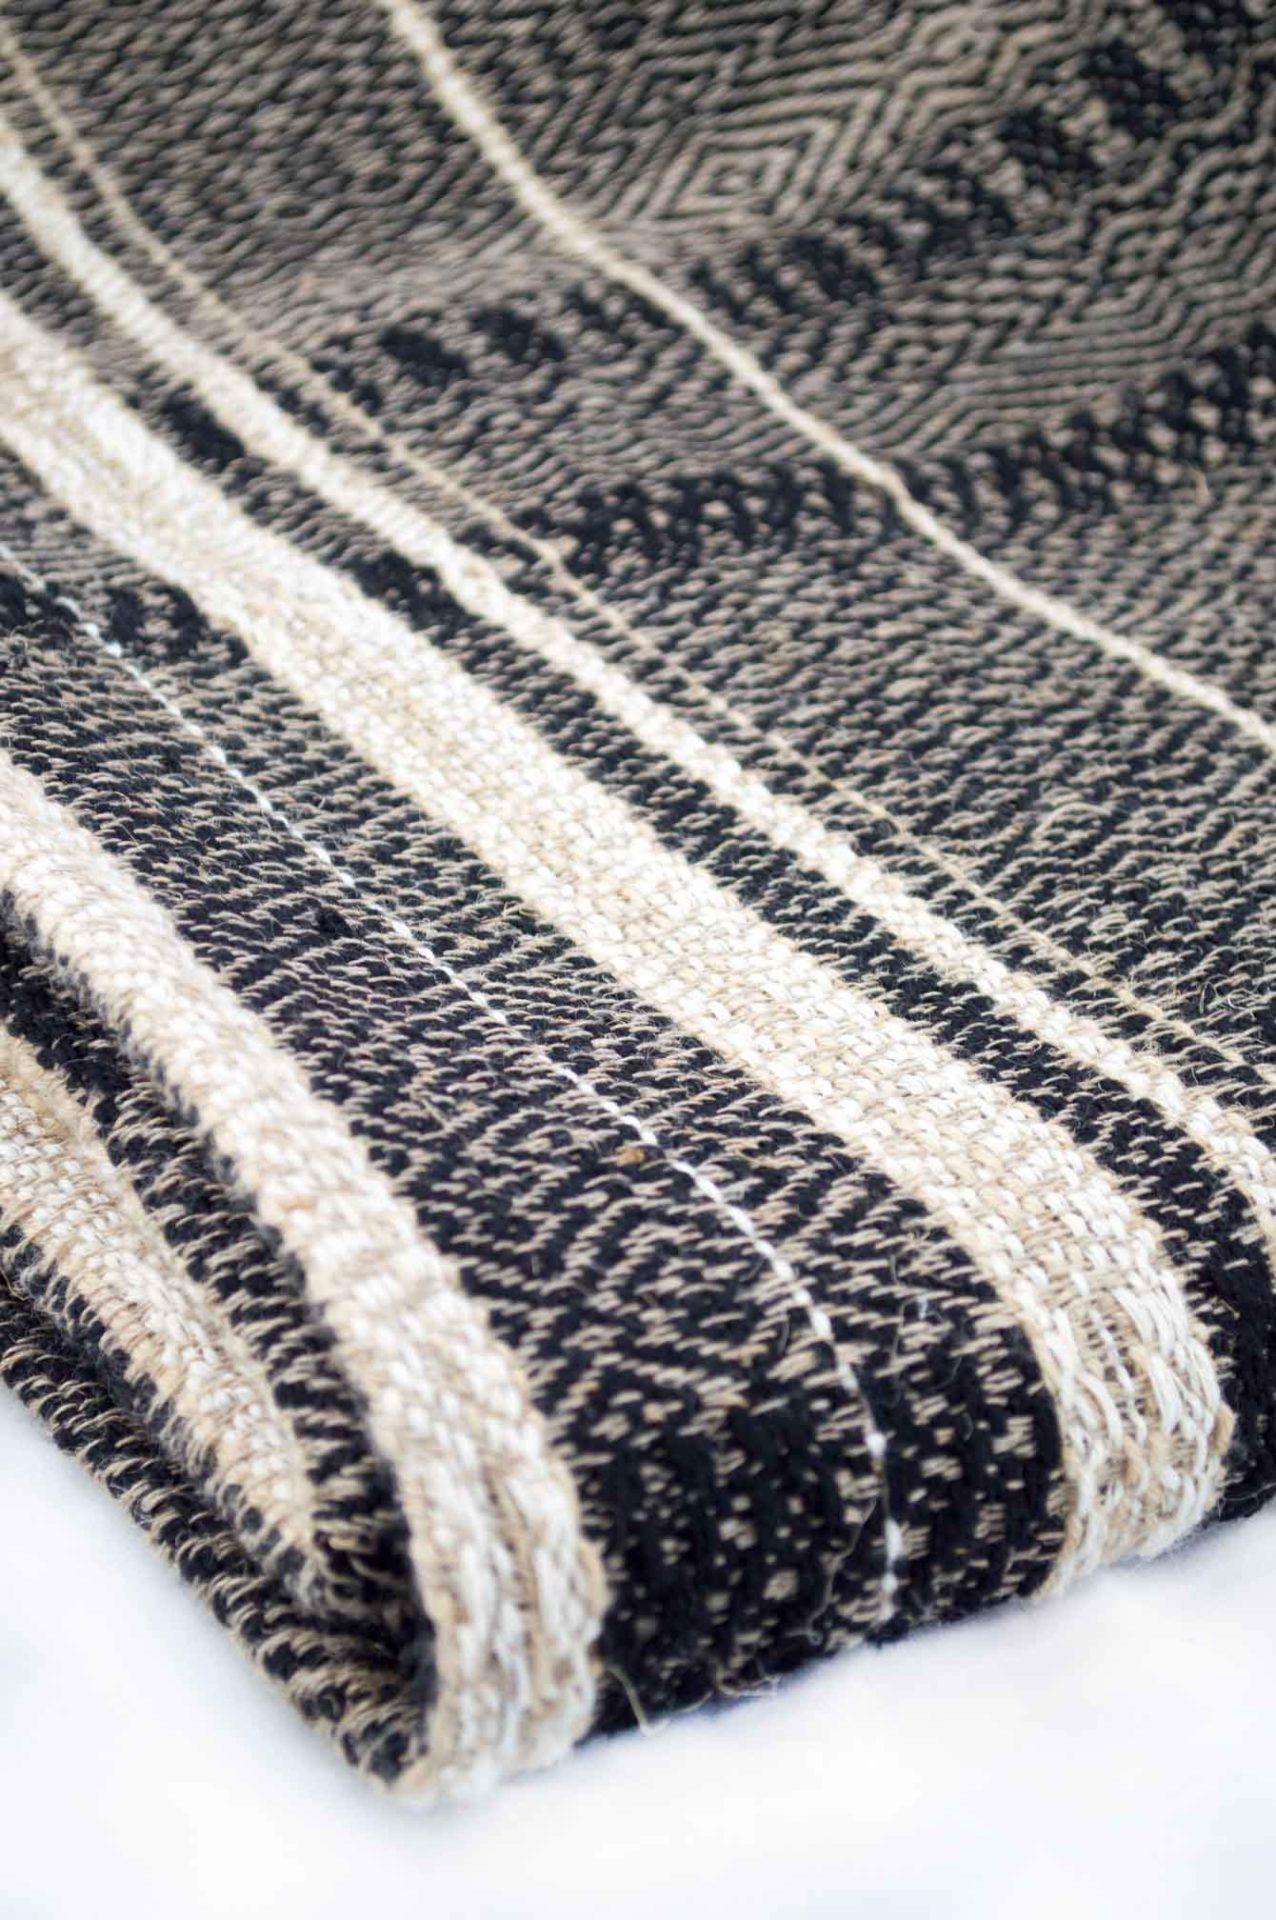 Throw blanket created with hemp, wool, linen. Union of different patterns and natural materials for the pleasure of the eyes.  Technique: Throw blanket hand-woven in a traditional way on non-mechanical looms in the 7th arrondissement of Paris in France.  Finishes: Right edge. Double stitching.  Size: 145 x 200 cm.  Single piece / 1 copy only.